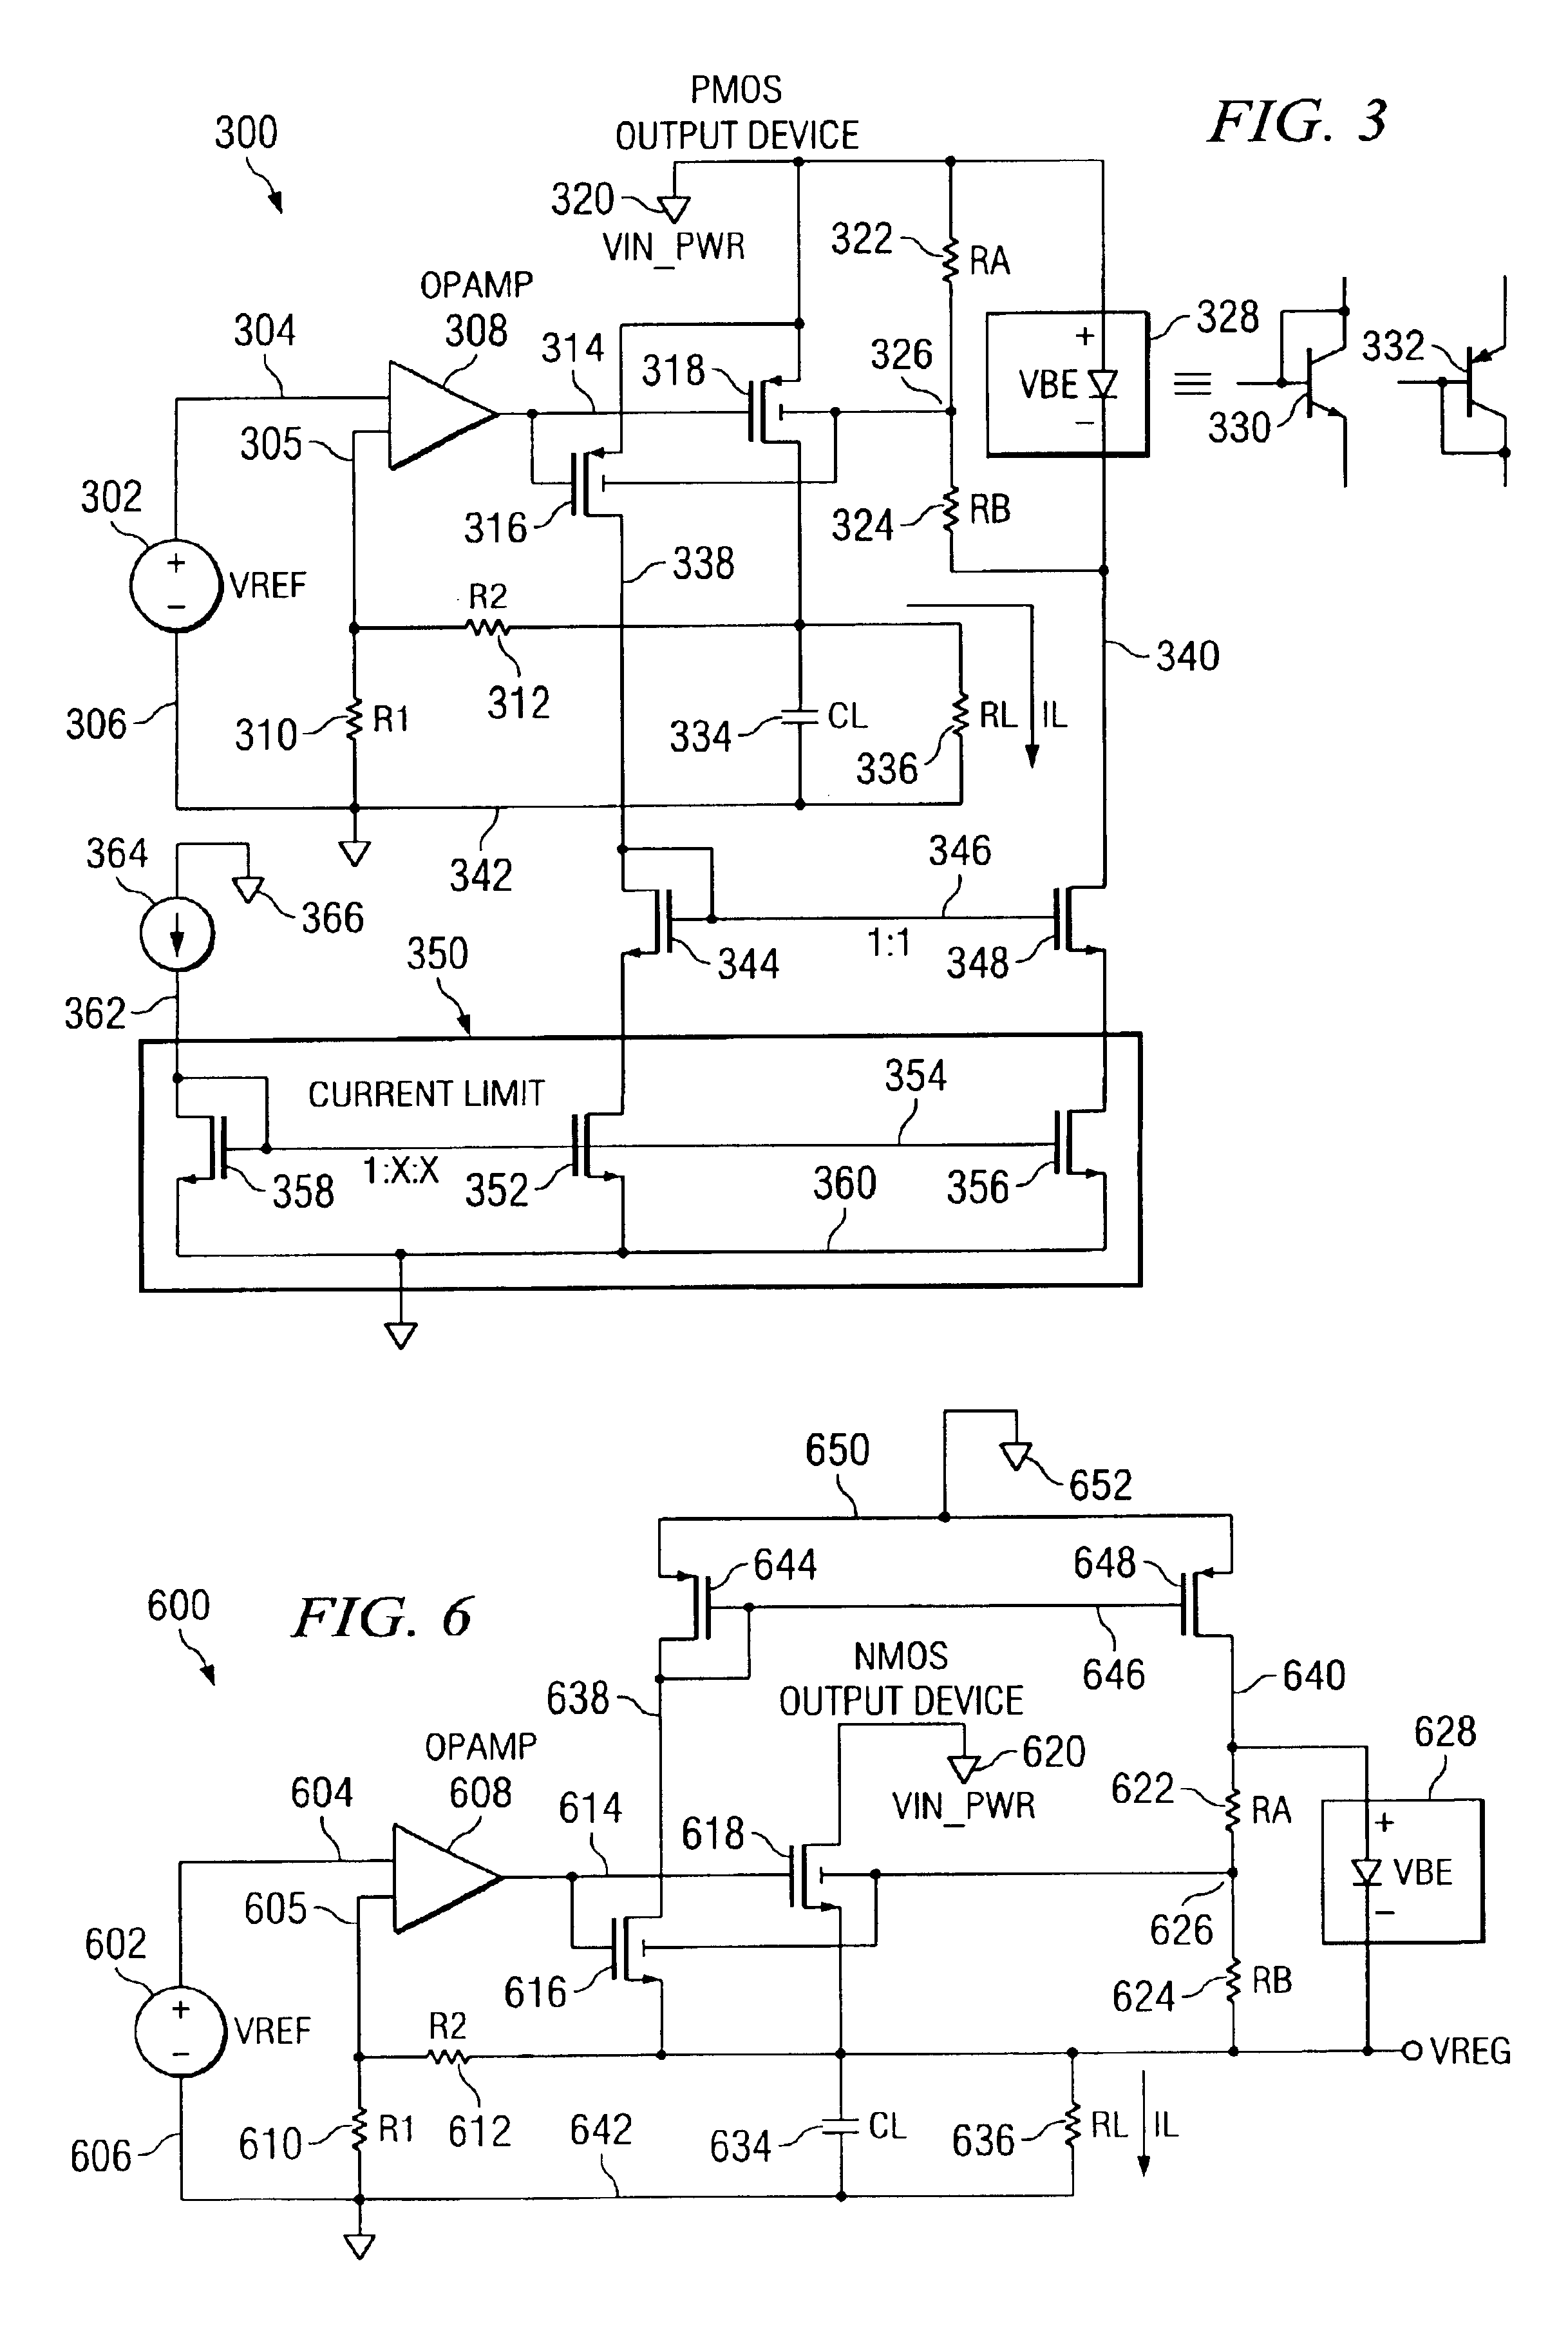 Threshold voltage adjustment for MOS devices